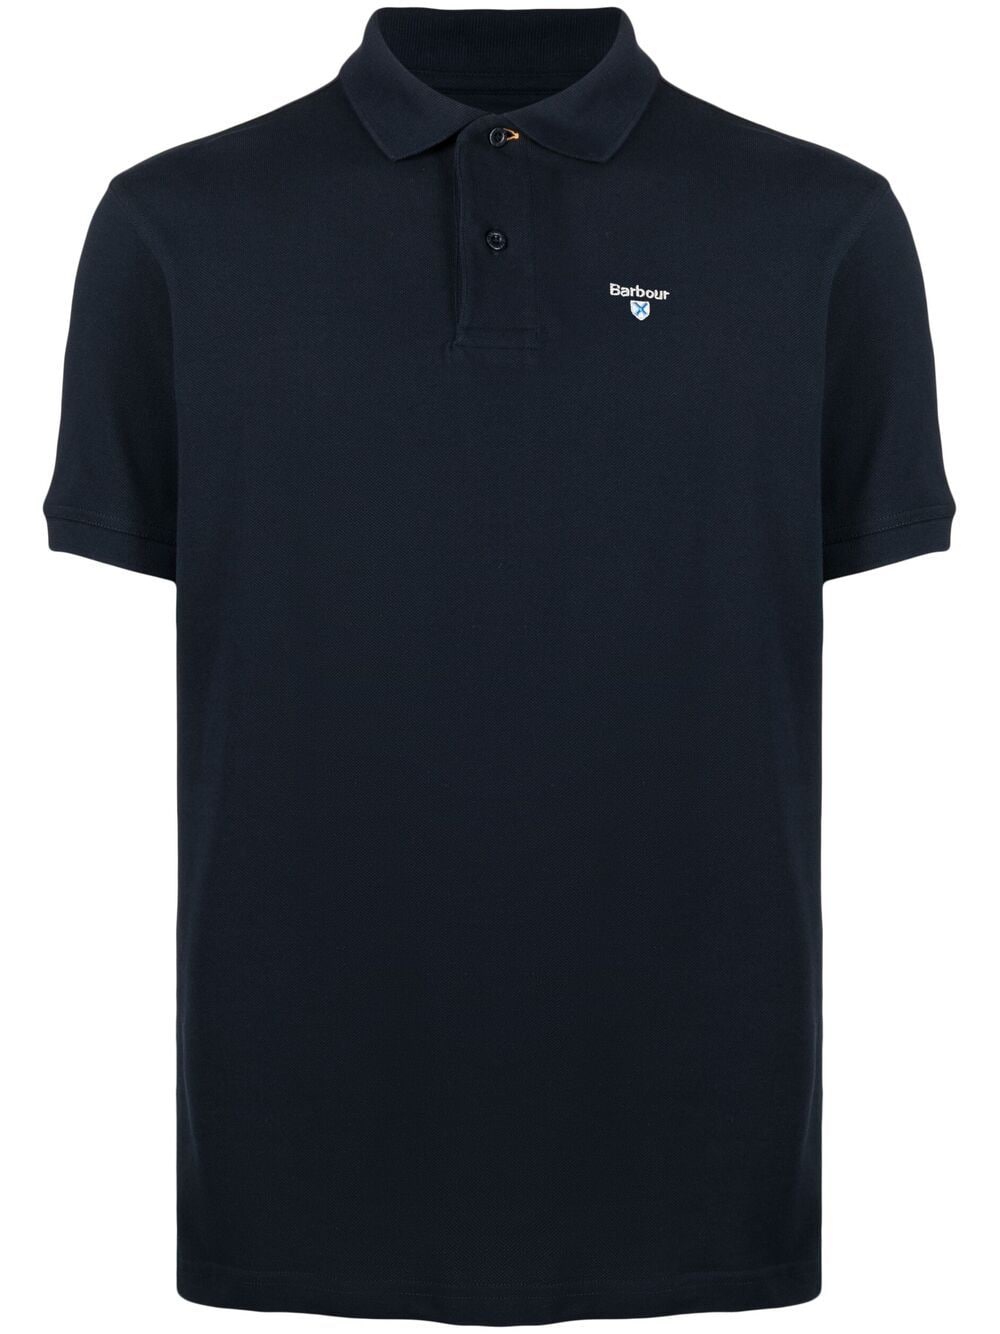 Barbour logo embroidered polo shirt - Blue von Barbour